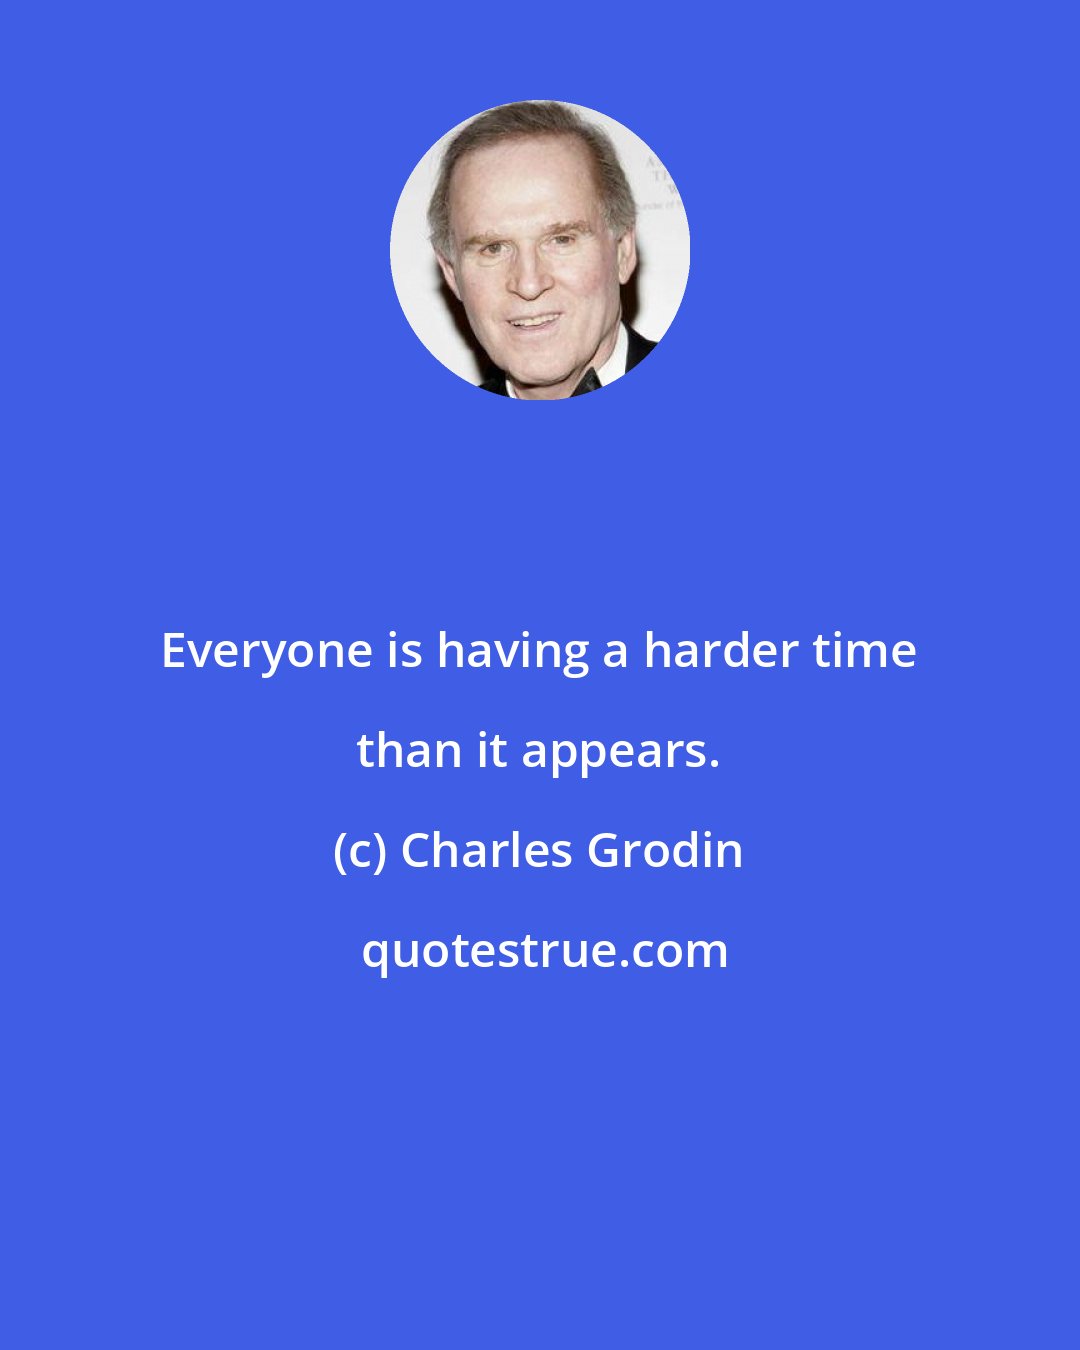 Charles Grodin: Everyone is having a harder time than it appears.